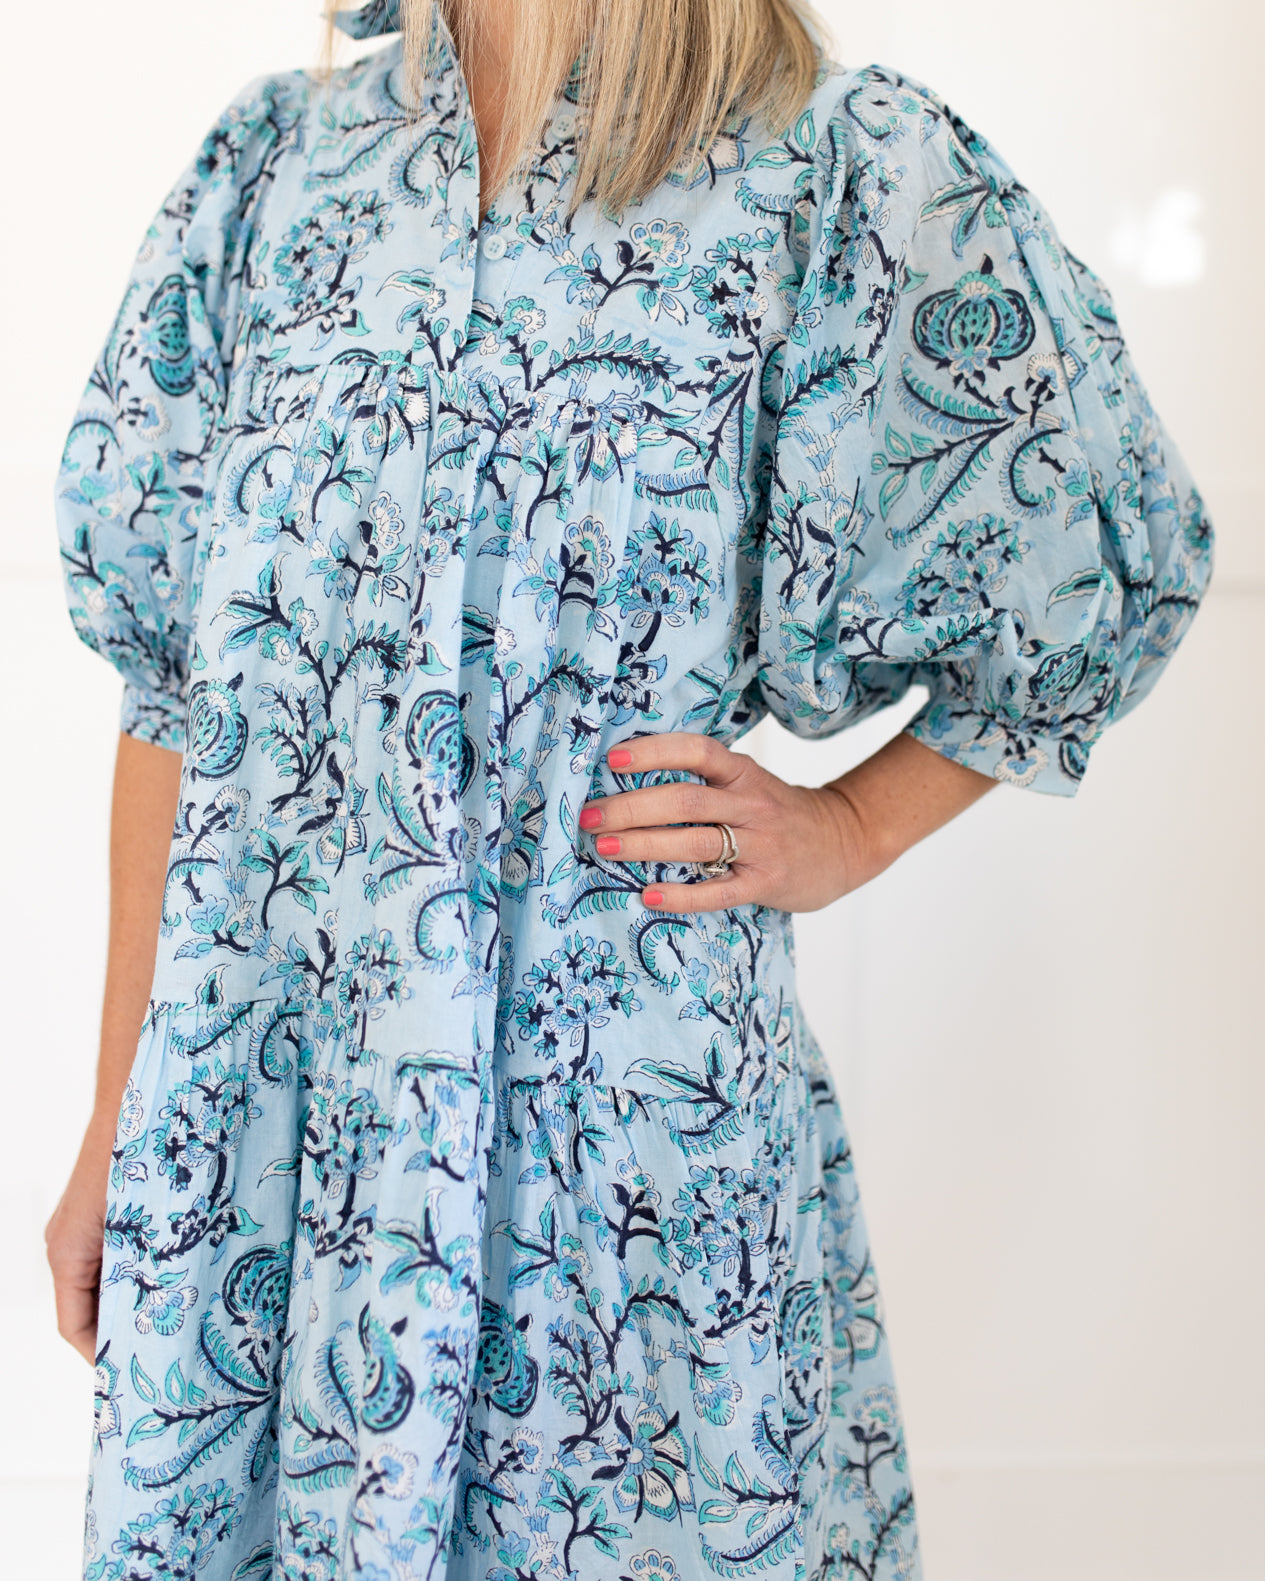 Blakely Dress in Light Blue and Navy Floral